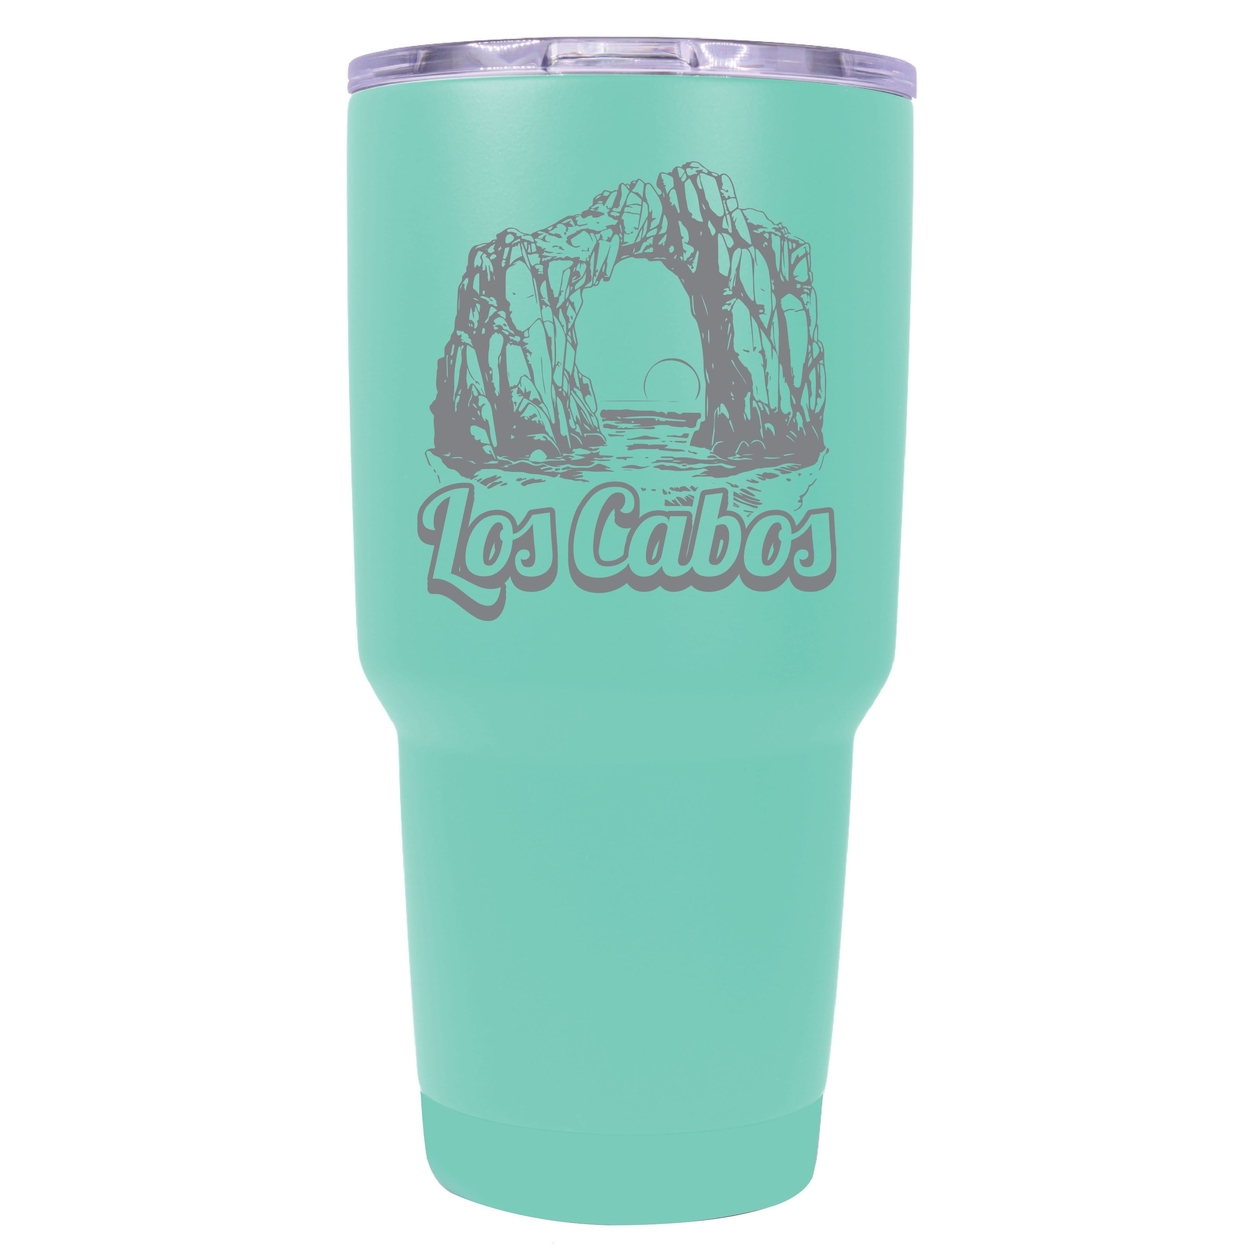 Los Cabos Mexico Souvenir 24 Oz Engraved Insulated Stainless Steel Tumbler - Rose Gold,,4-Pack